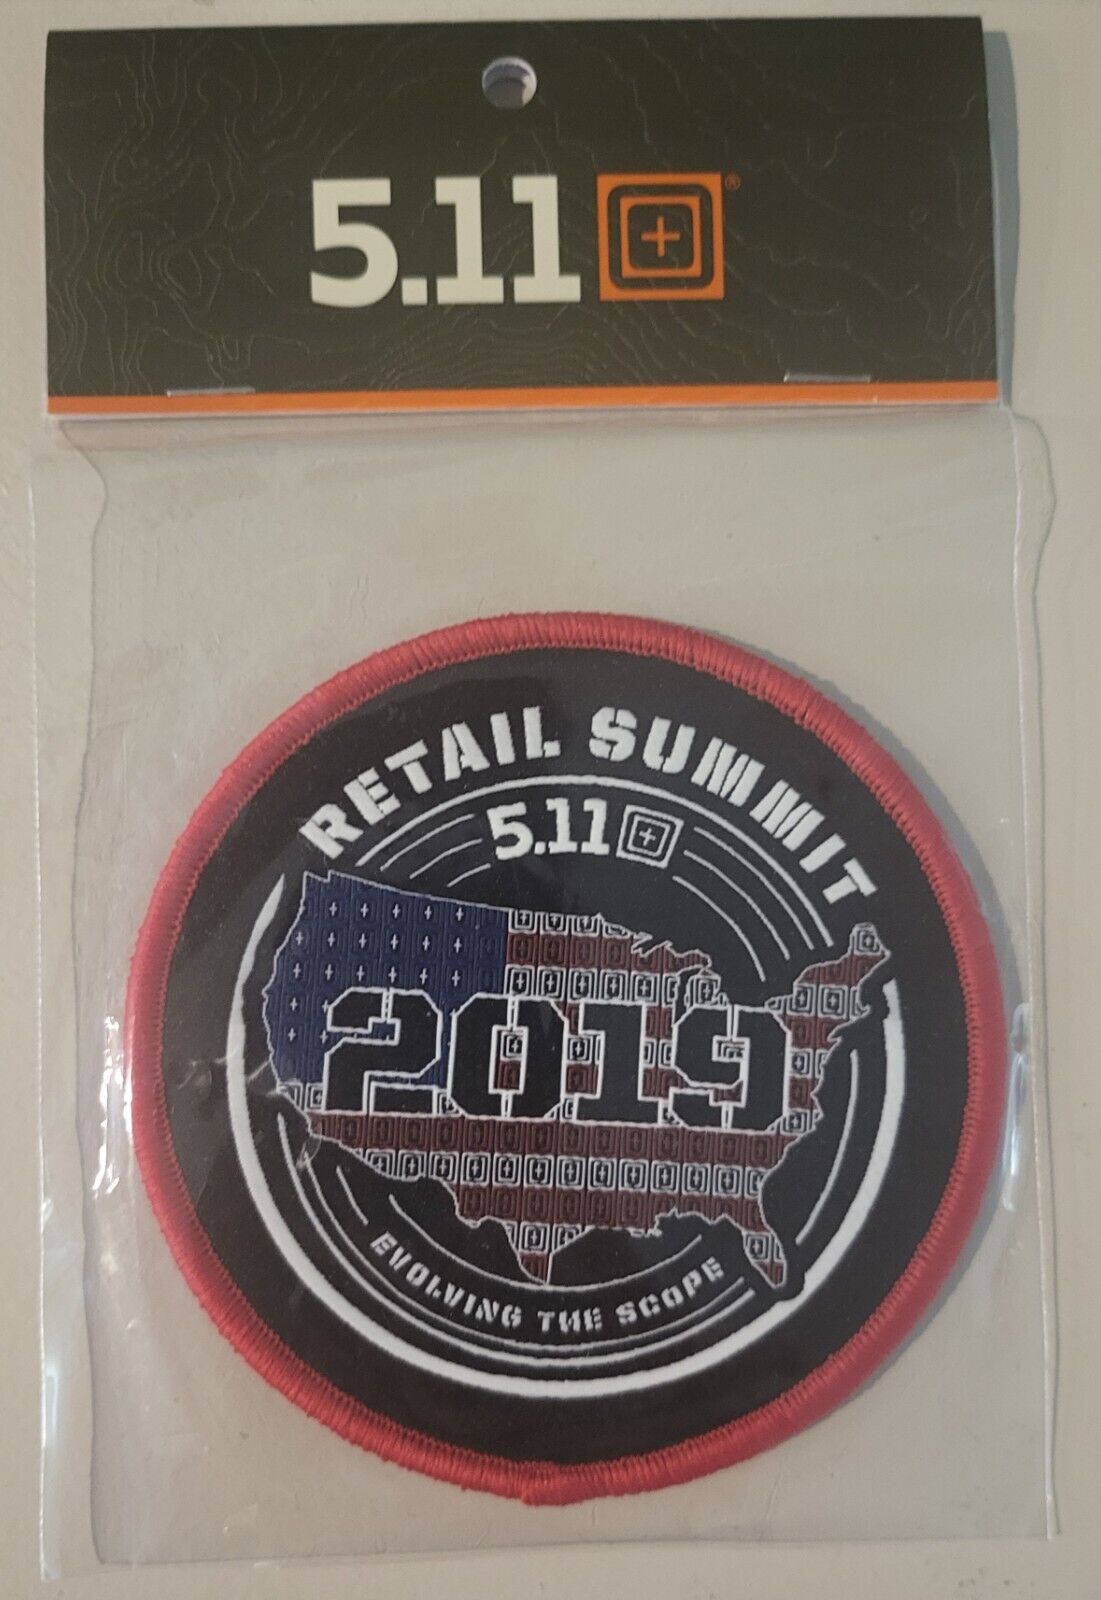 5.11 Tactical Retail Summit 2019 Patch